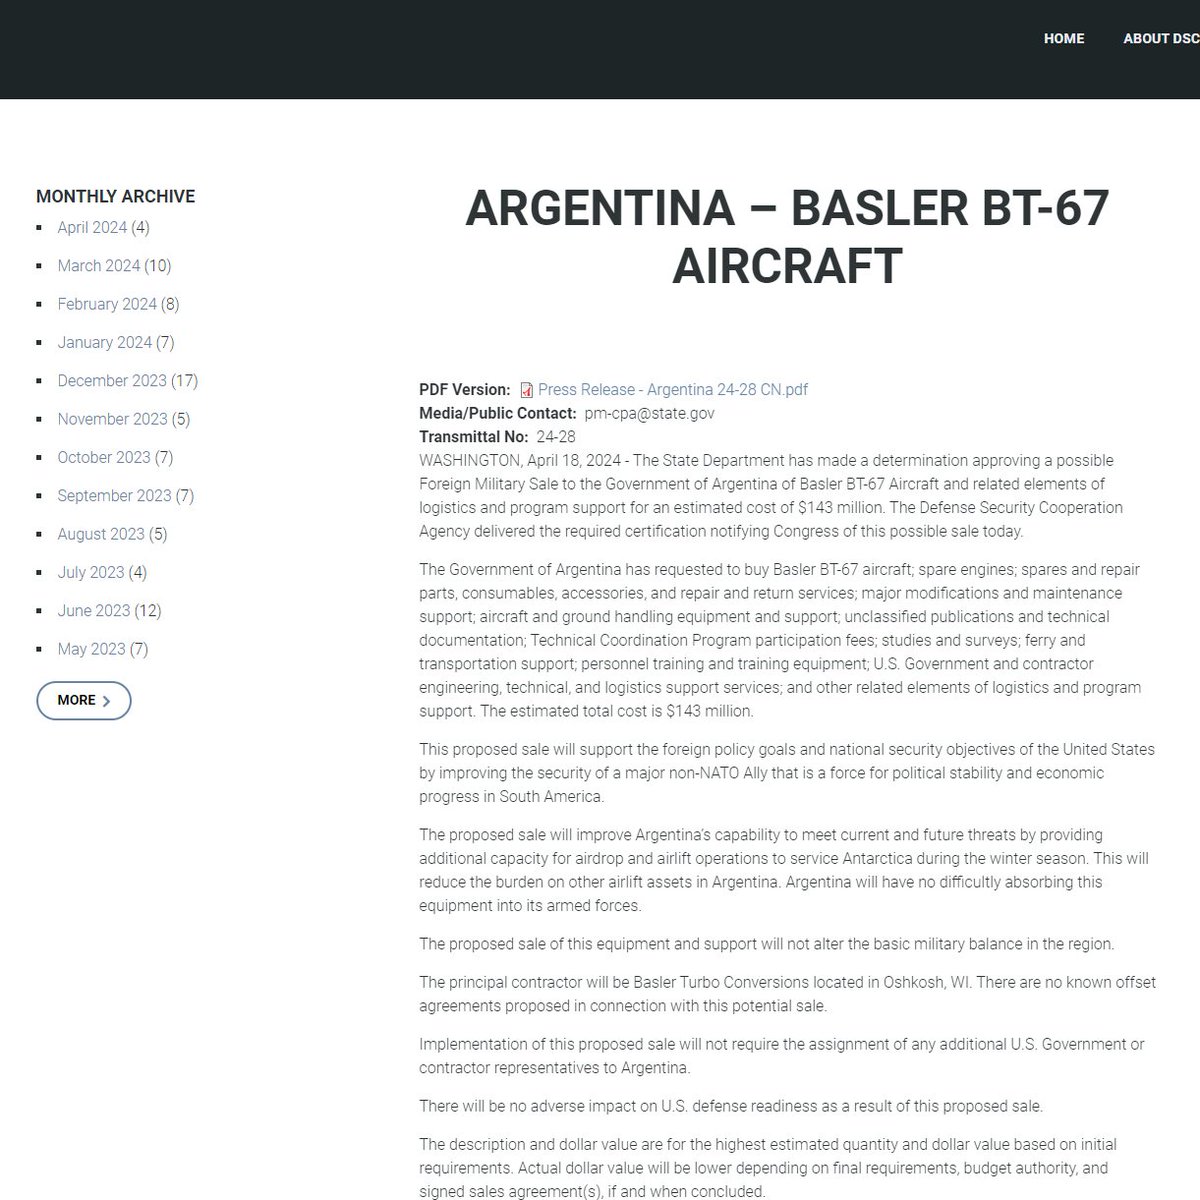 .@StateDept 🇺🇸 authorizes a proposed Foreign Military Sales #FMS case to 🇦🇷 #Argentina for Basler BT-67 Aircraft and related elements of logistics and program support with an estimated cost of $143 million. tinyurl.com/ytc98sn7